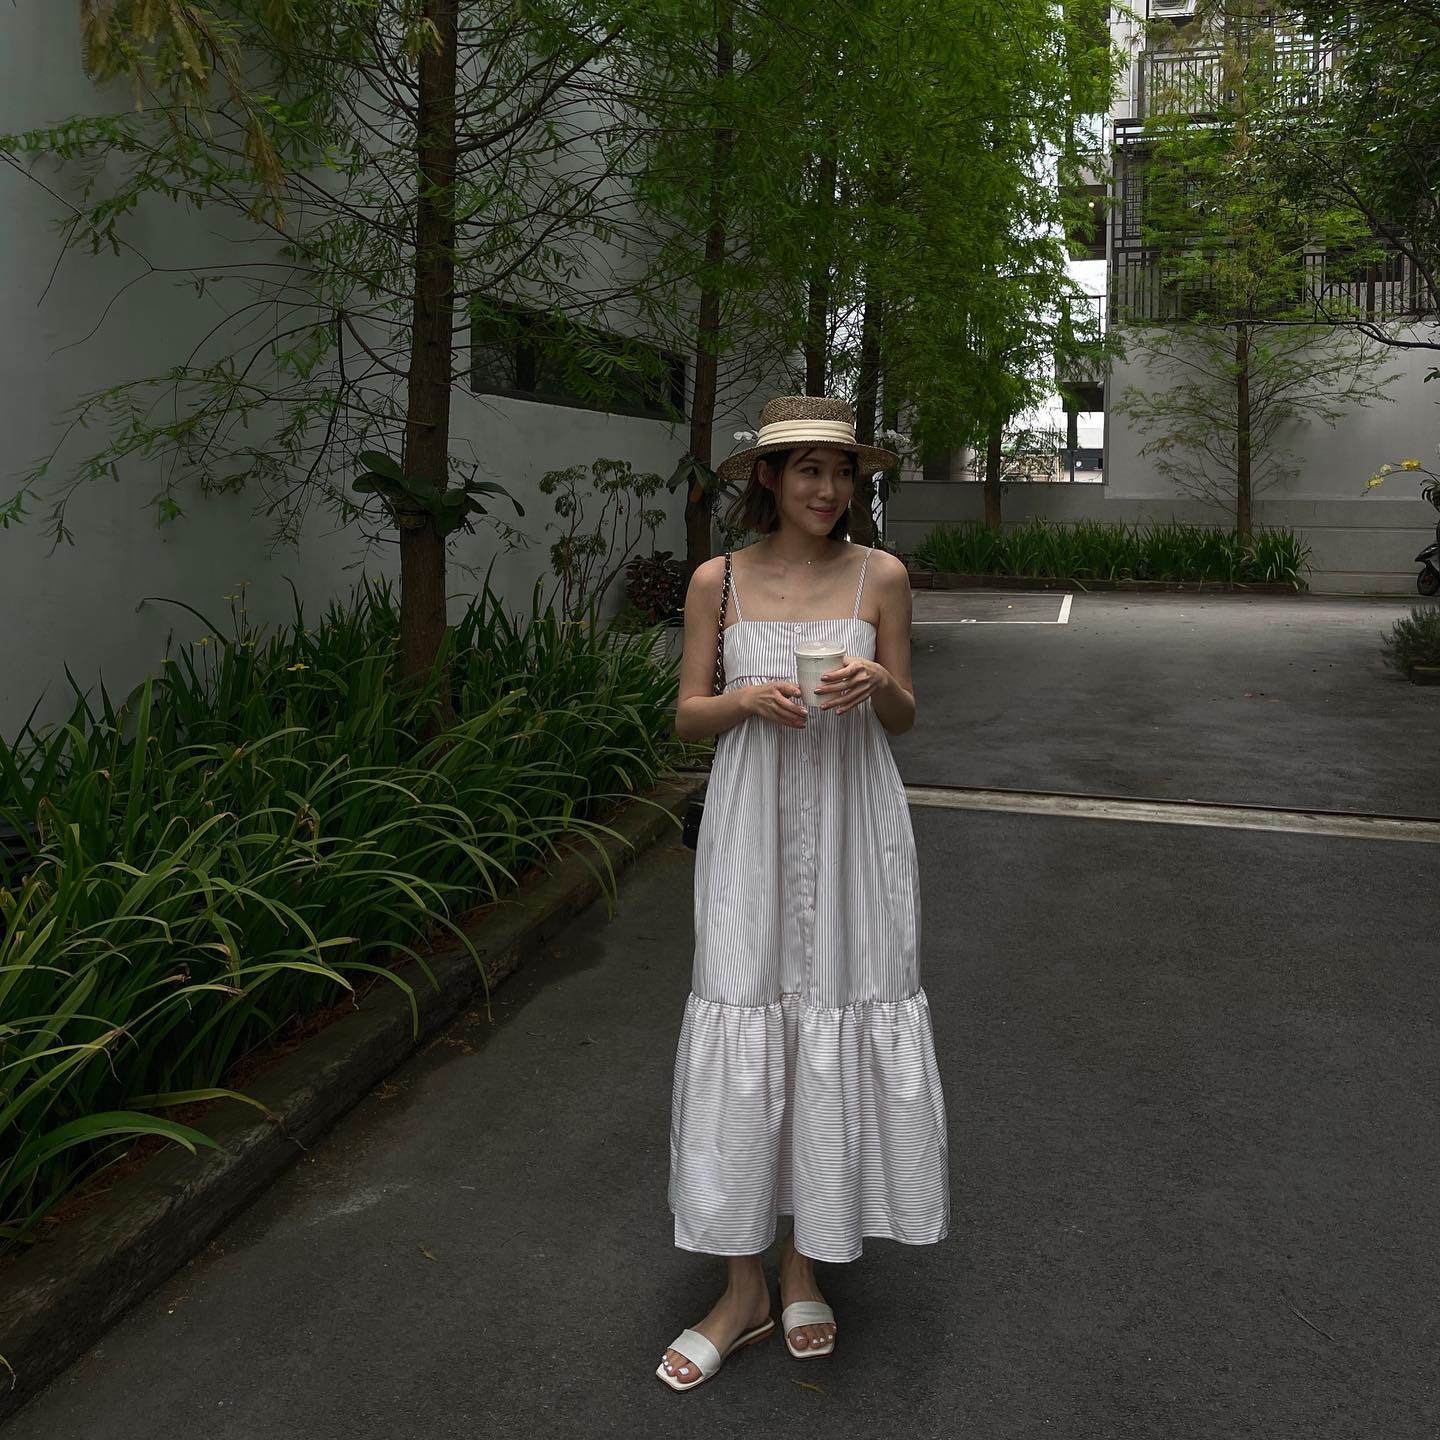 Taiwanese blogger adds a simple but beautiful way to wear clothes when traveling - photo 7.